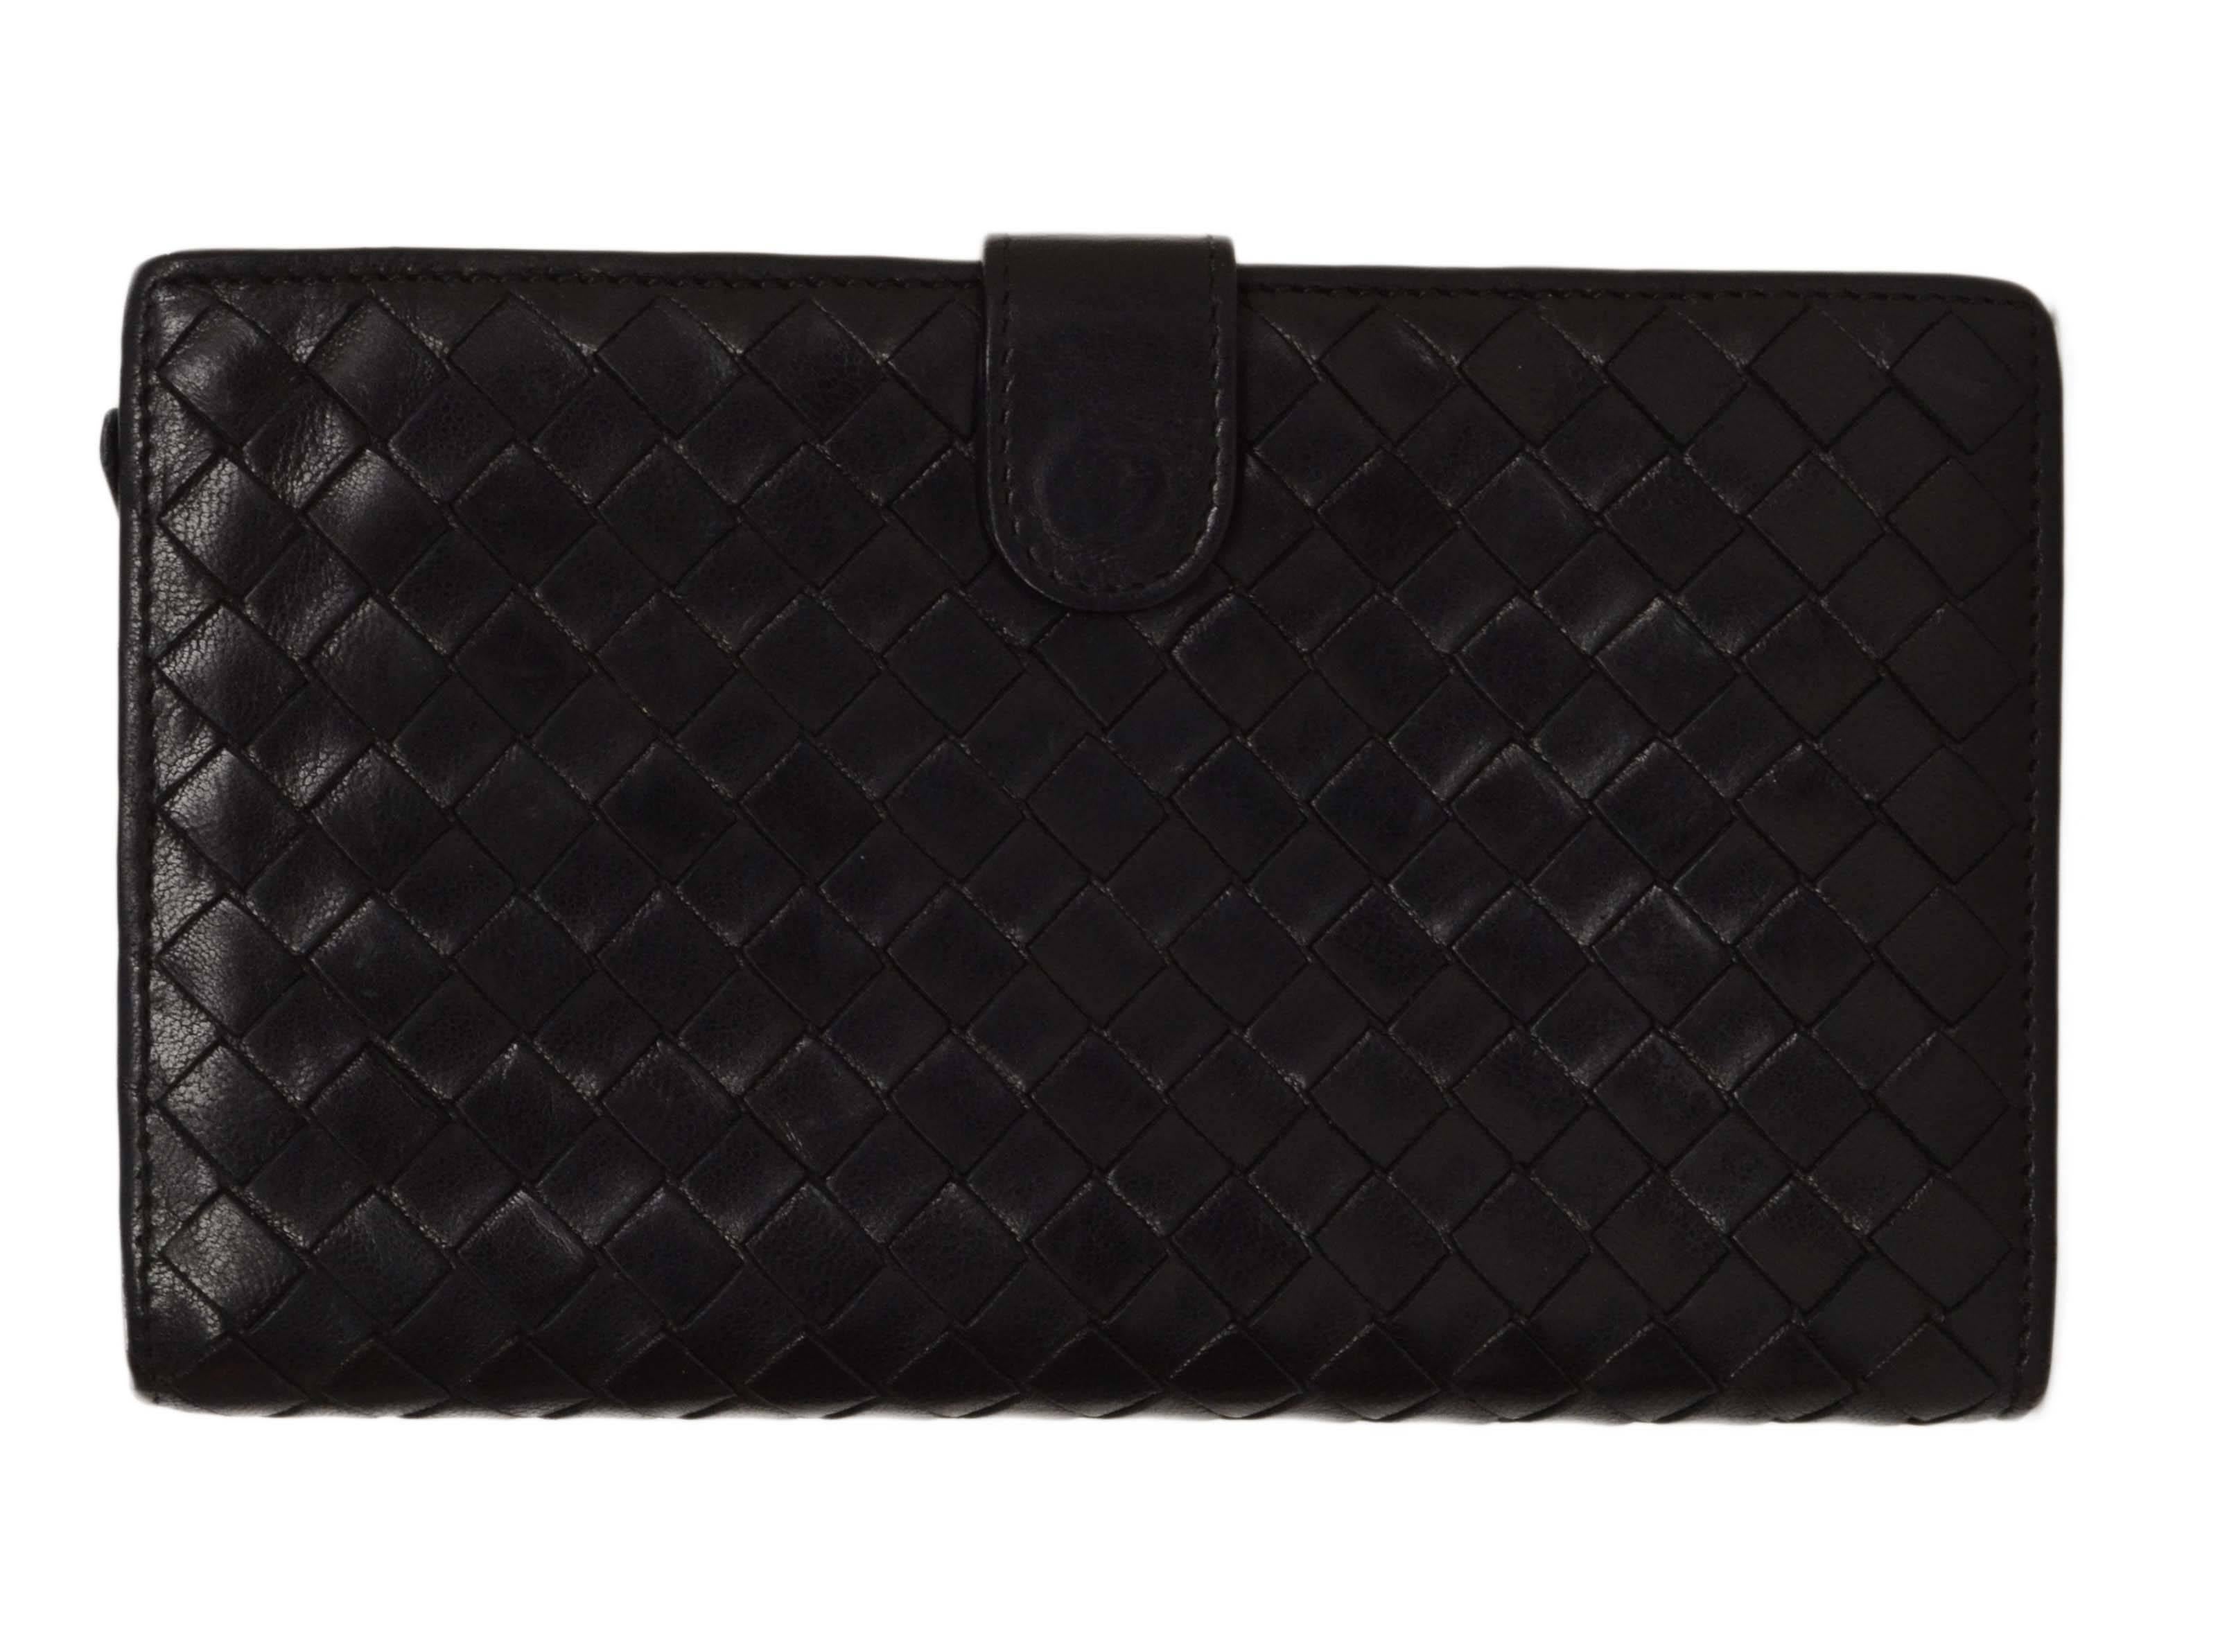 Bottega Veneta Black Woven Leather Continental Wallet

    Made In: Italy

    Color: Black

    Materials: Leather

    Lining: Leather

    Closure/Opening: Snap closure with zipper coin pocket

    Interior Pockets: Wallet features 8